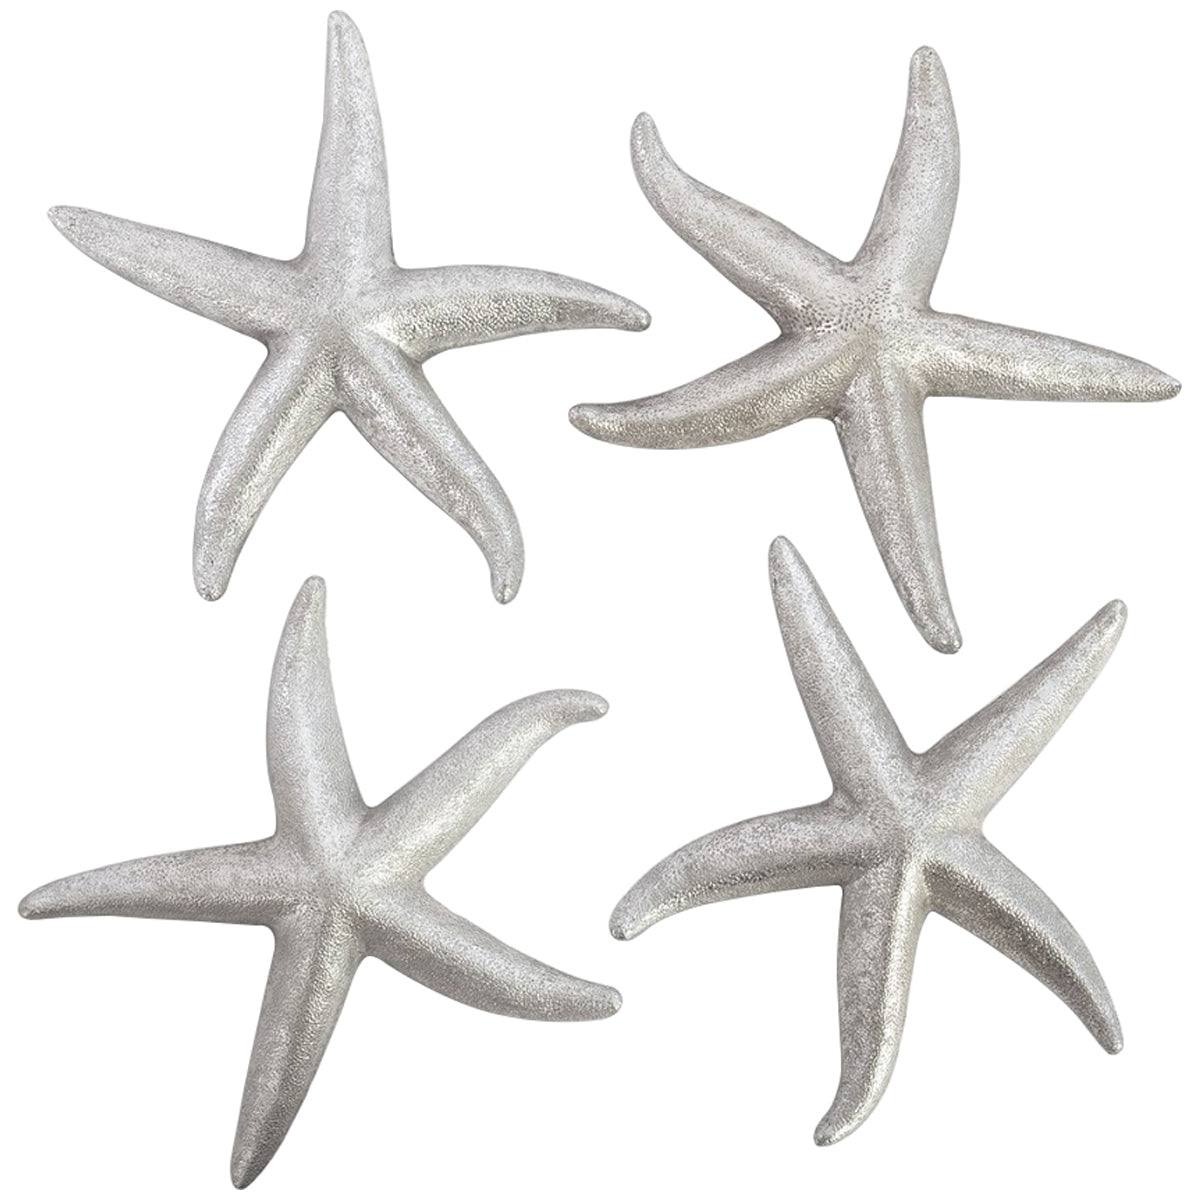 Phillips Collection Starfish Sculpture, Set of 4